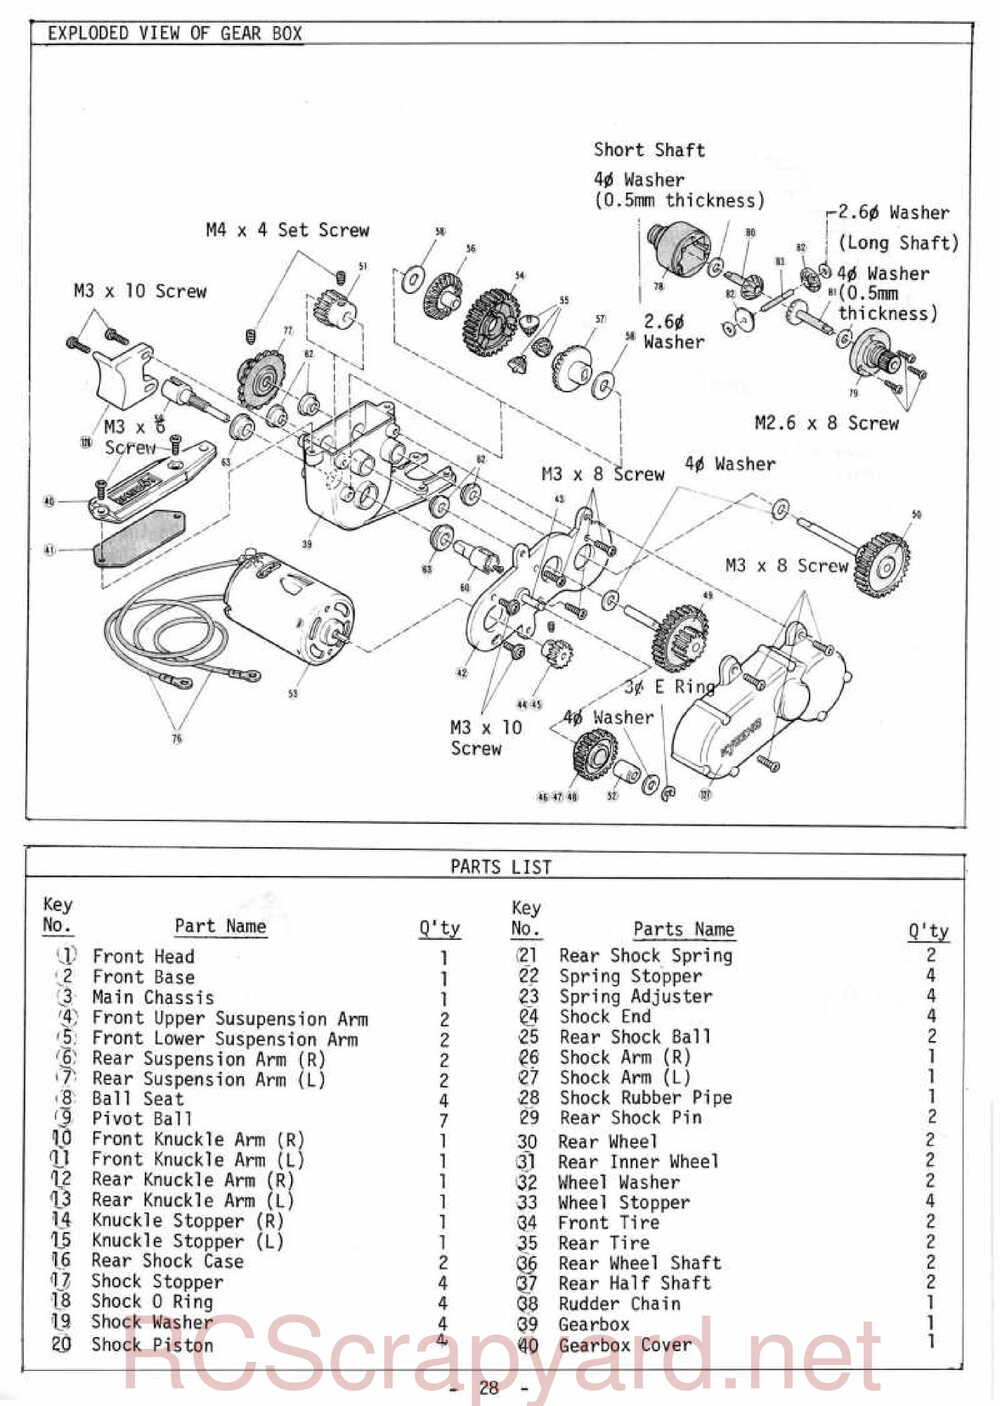 Kyosho - 3069 - Gallop MkII - Manual - Page 28